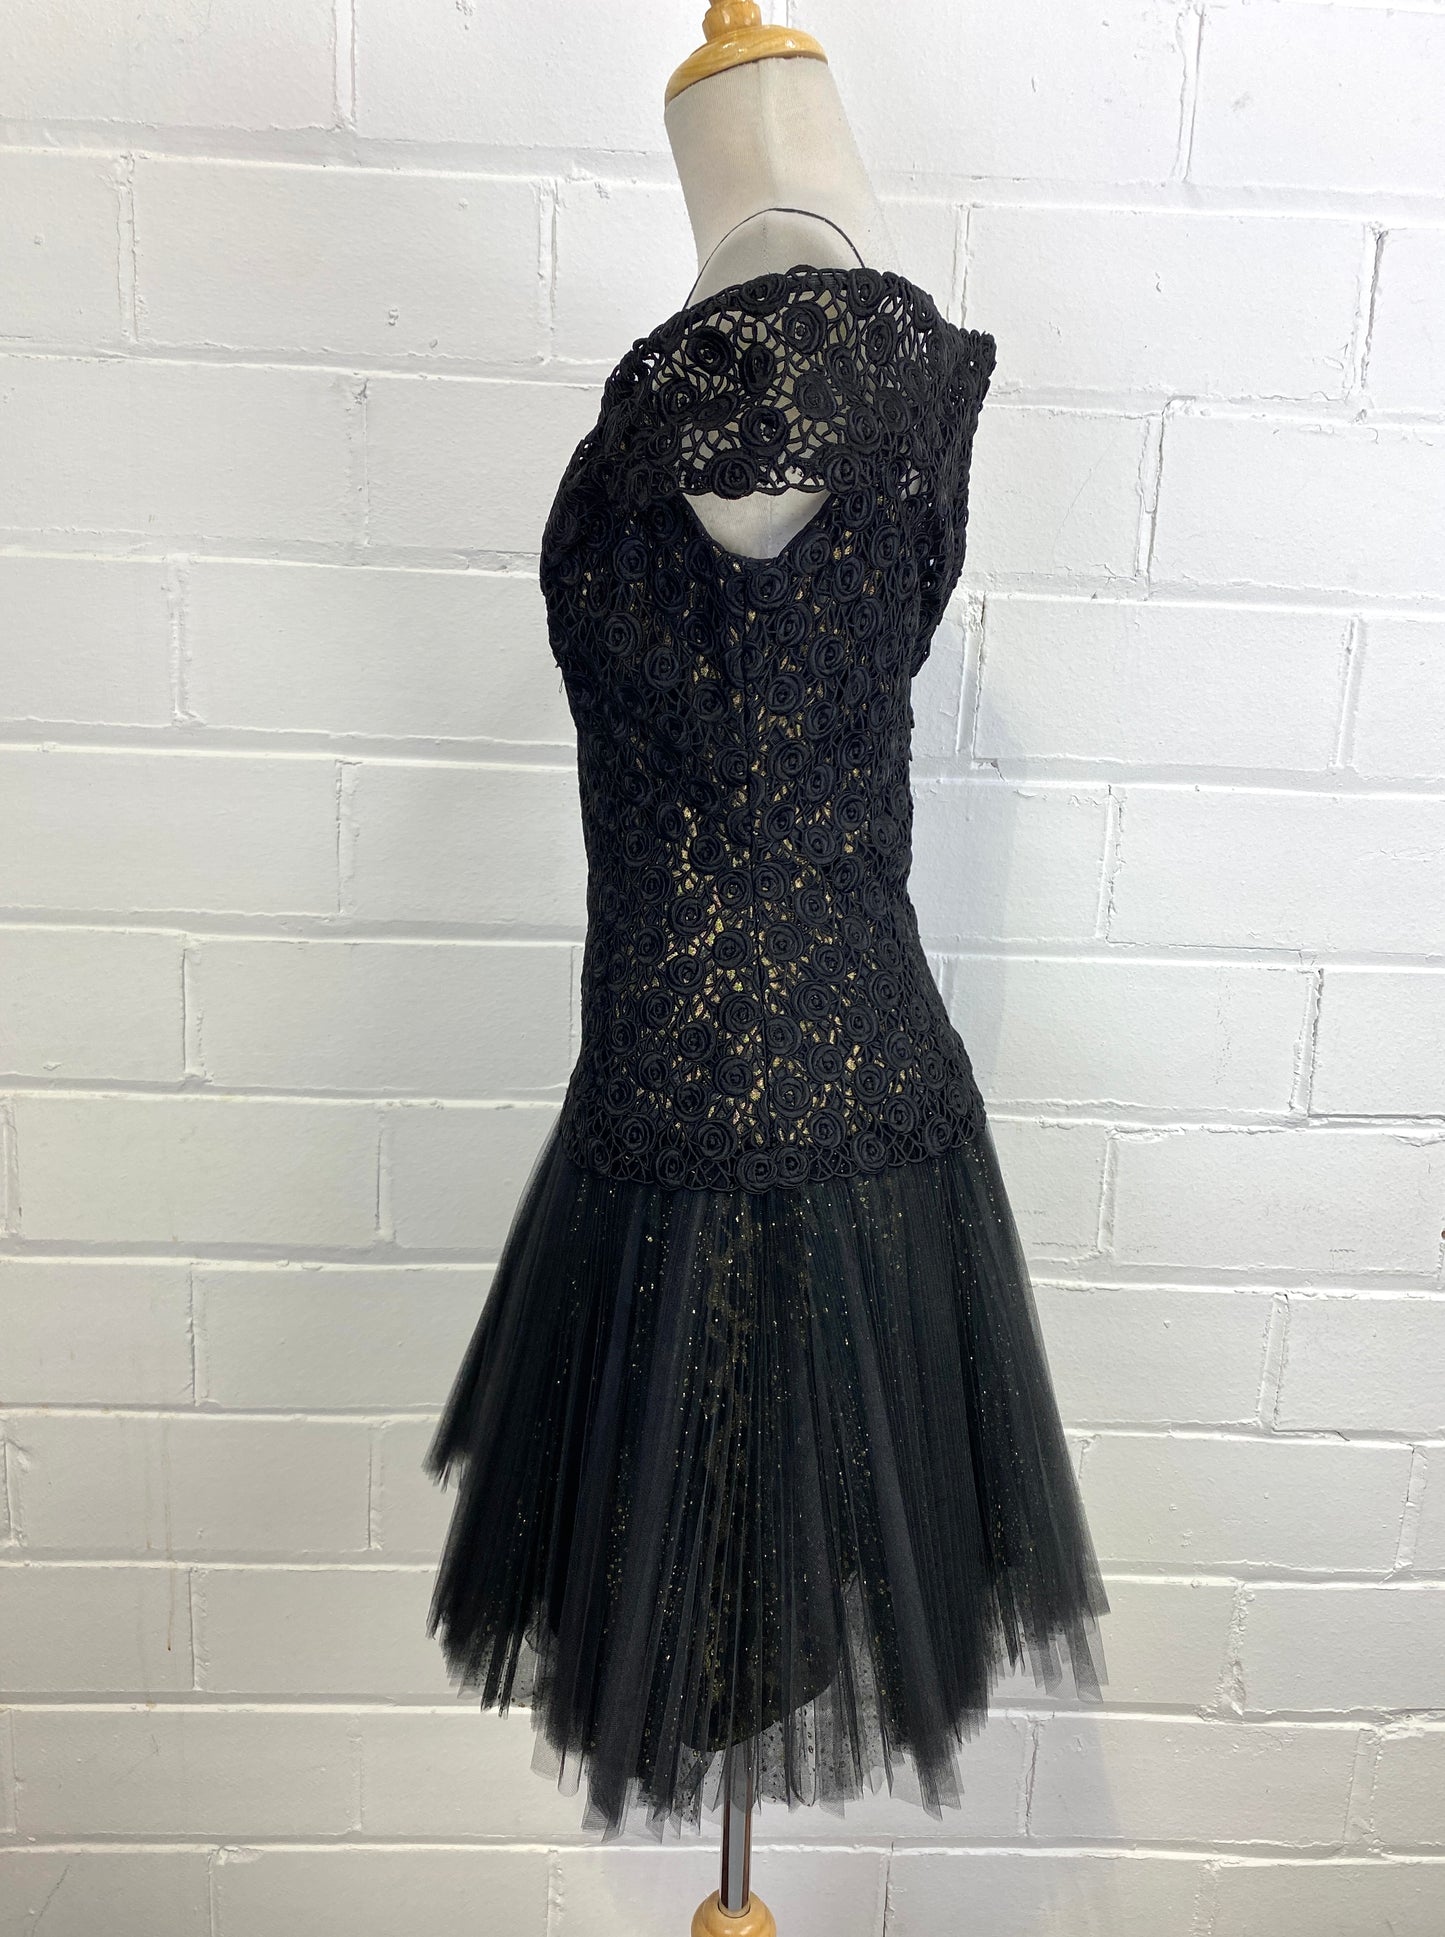 Vintage 1980s Black Pleated Tulle Drop-Waist Party Dress with Rose Lace Bodice